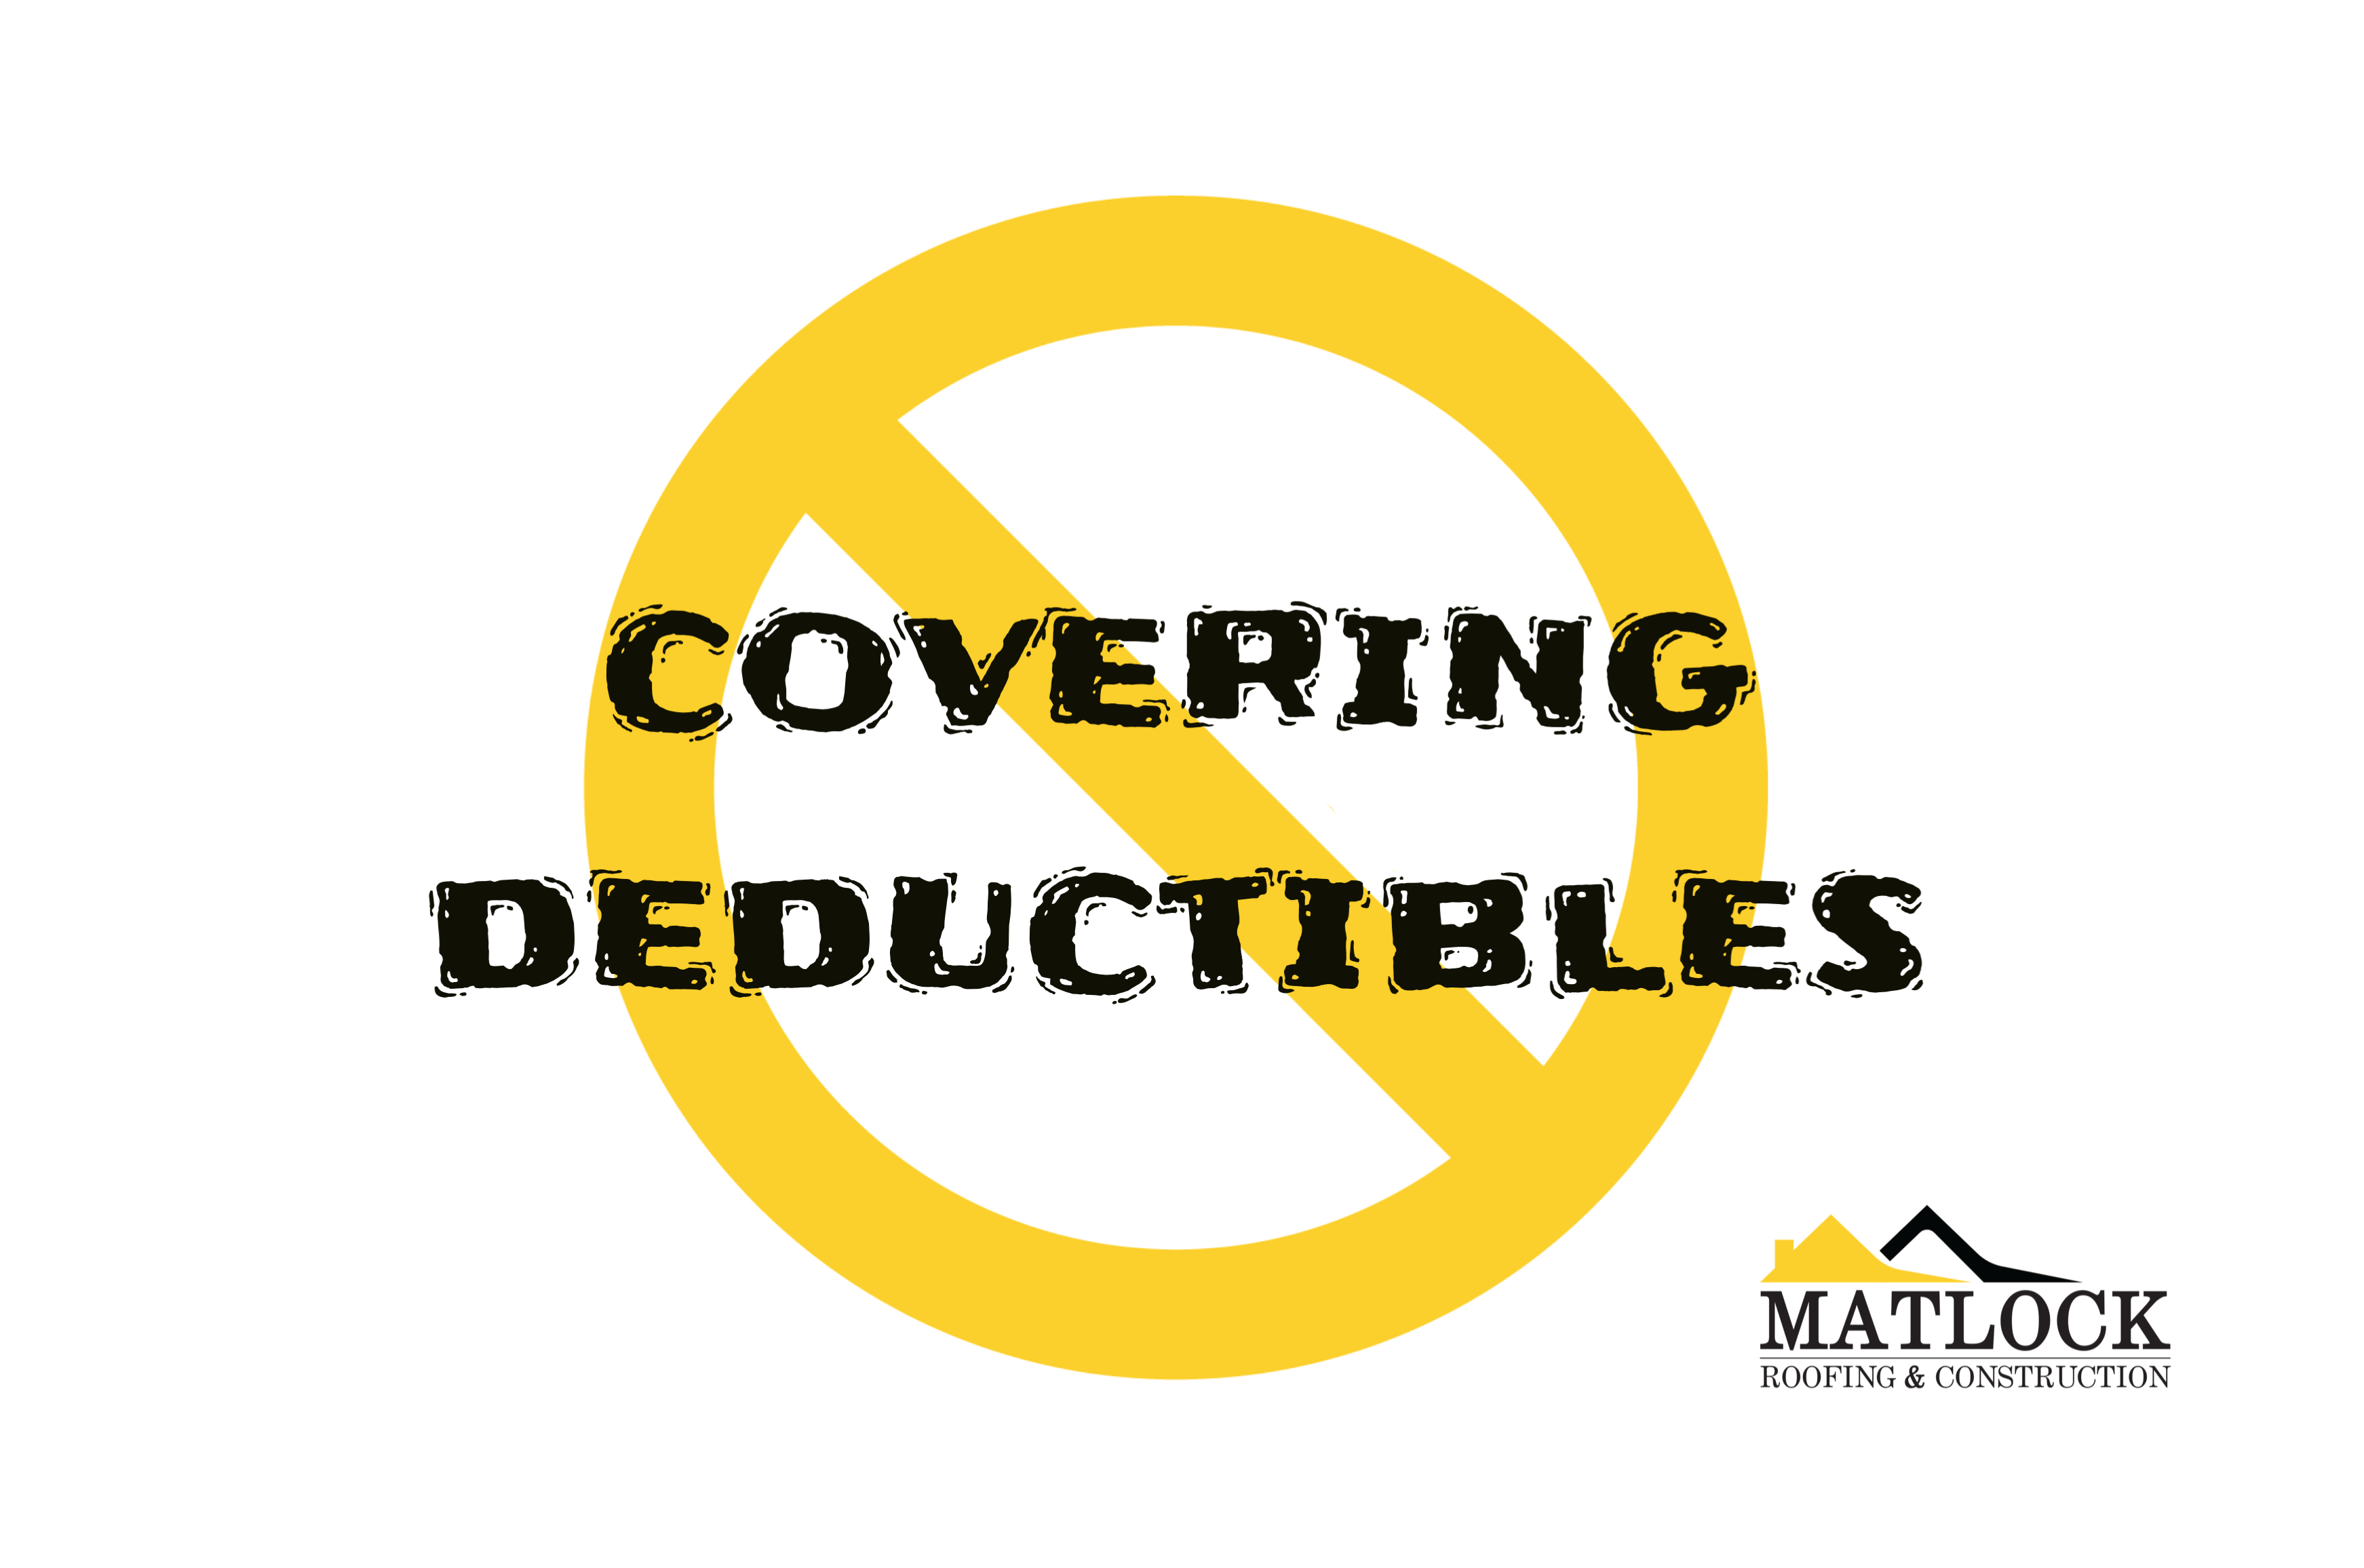 Matlock does NOT cover insurance deductibles